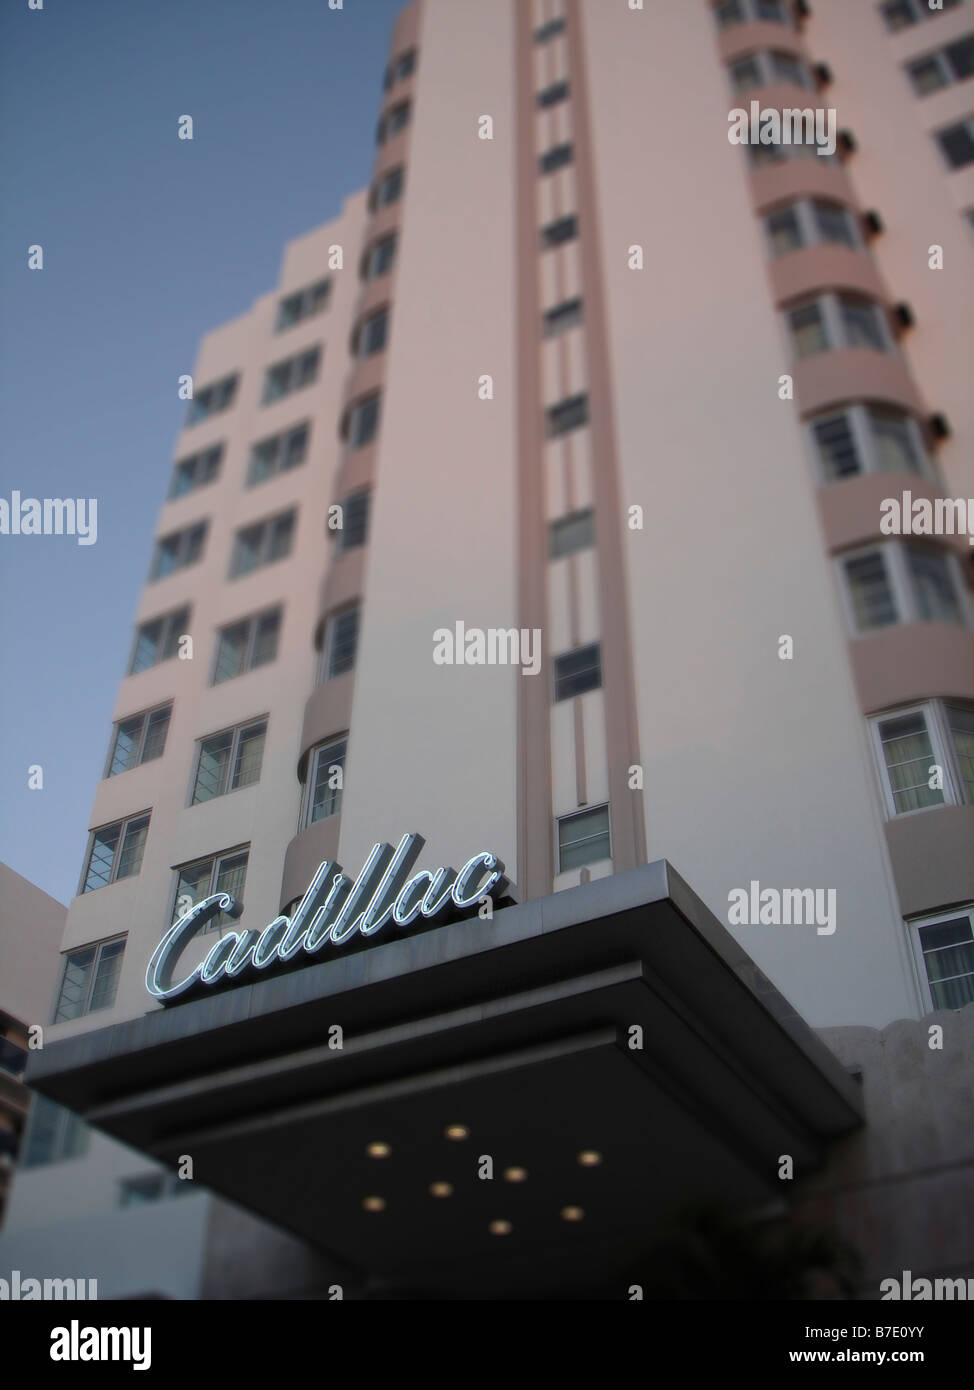 Cadillac Hotel, Miami South Beach. A historic U.S. hotel added to the U.S. National Register of Historic Places. Stock Photo